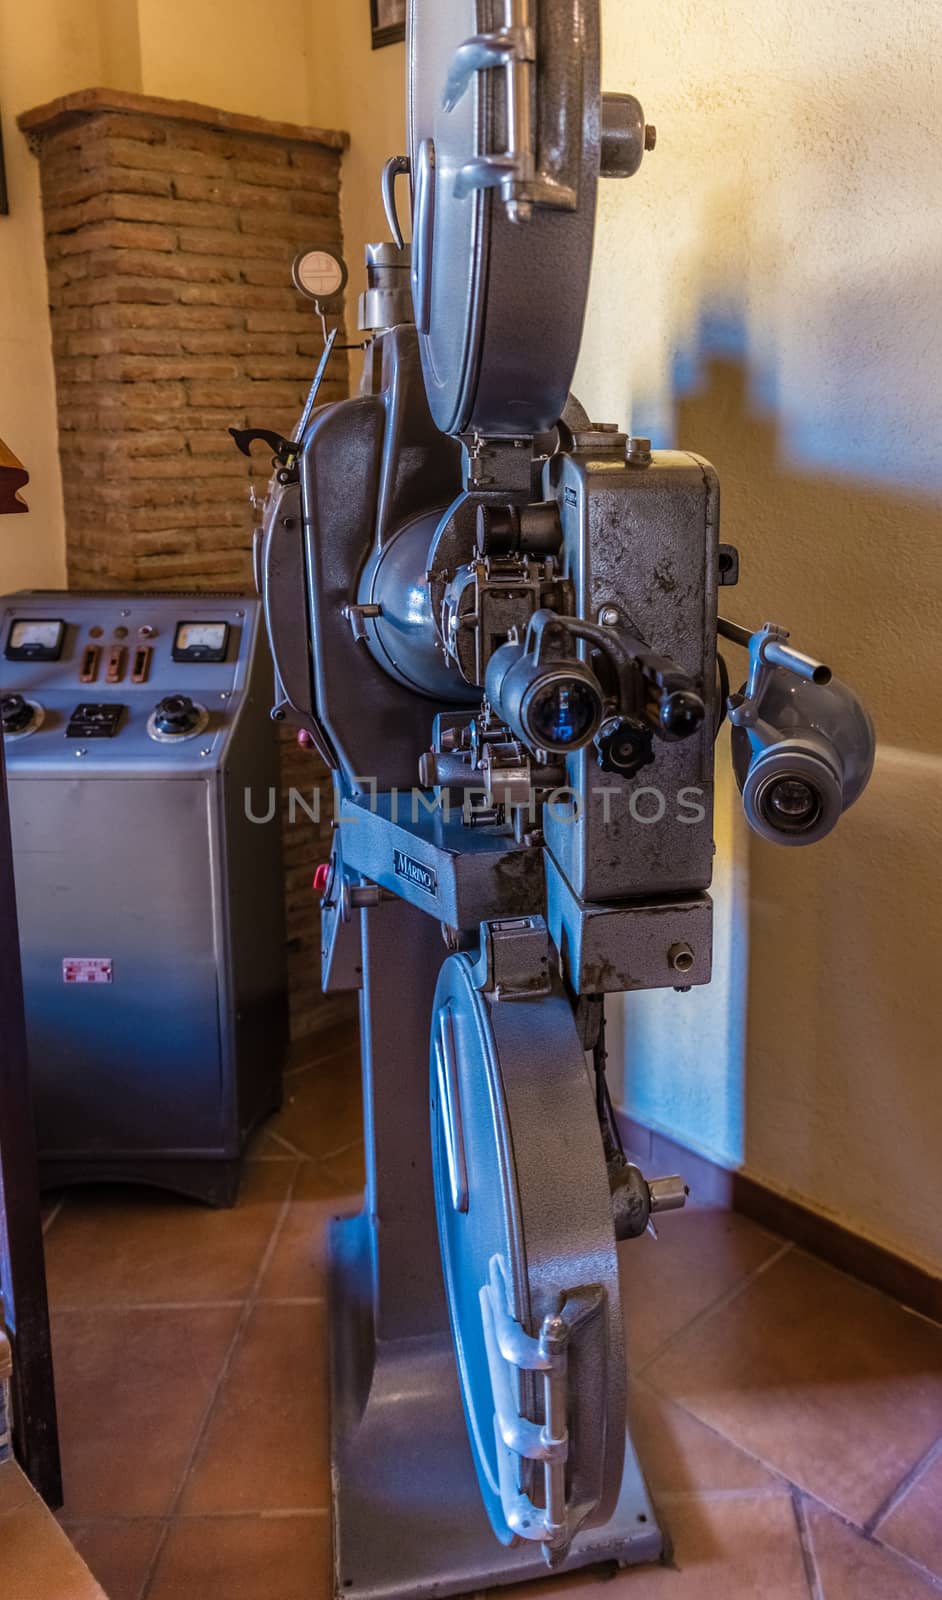 Old movie projector for cinema. Vintage movie camera keep in museum. It is use with retro film. But the body is classic design. The vintage cinema projector is analog and difficult to use it. by jcdiazhidalgo